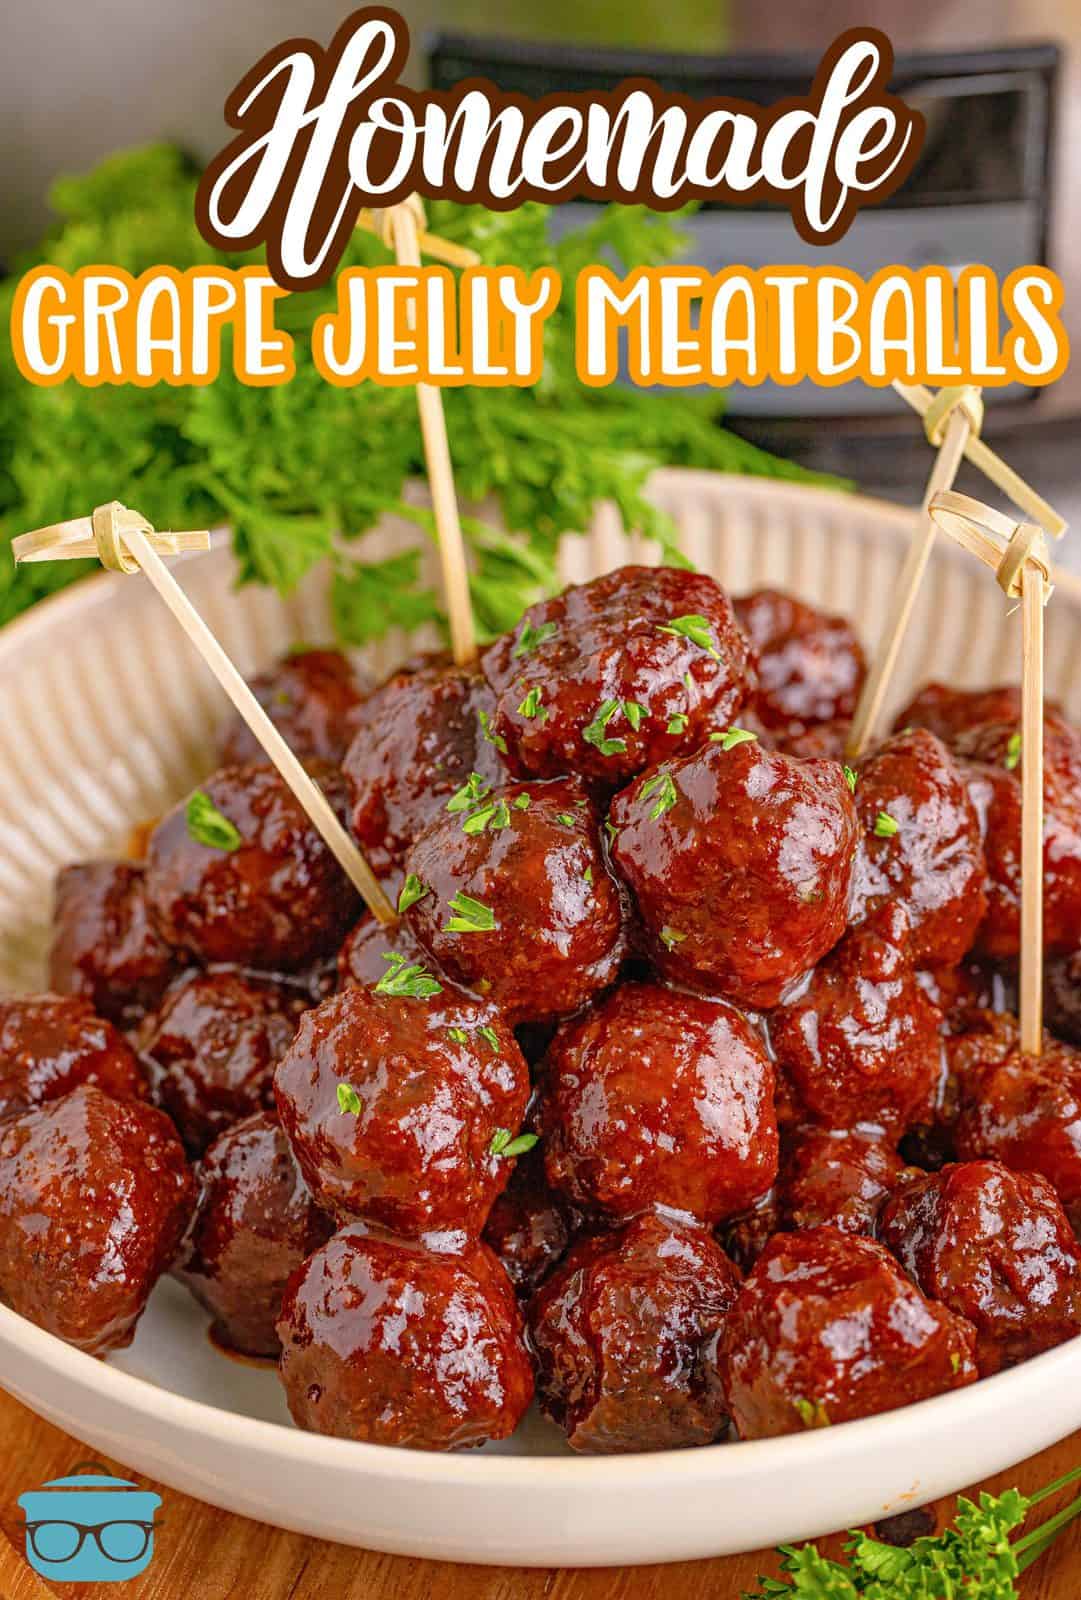 Pinterest image of Homemade Grape Jelly Meatballs in dish with cocktail toothpicks.